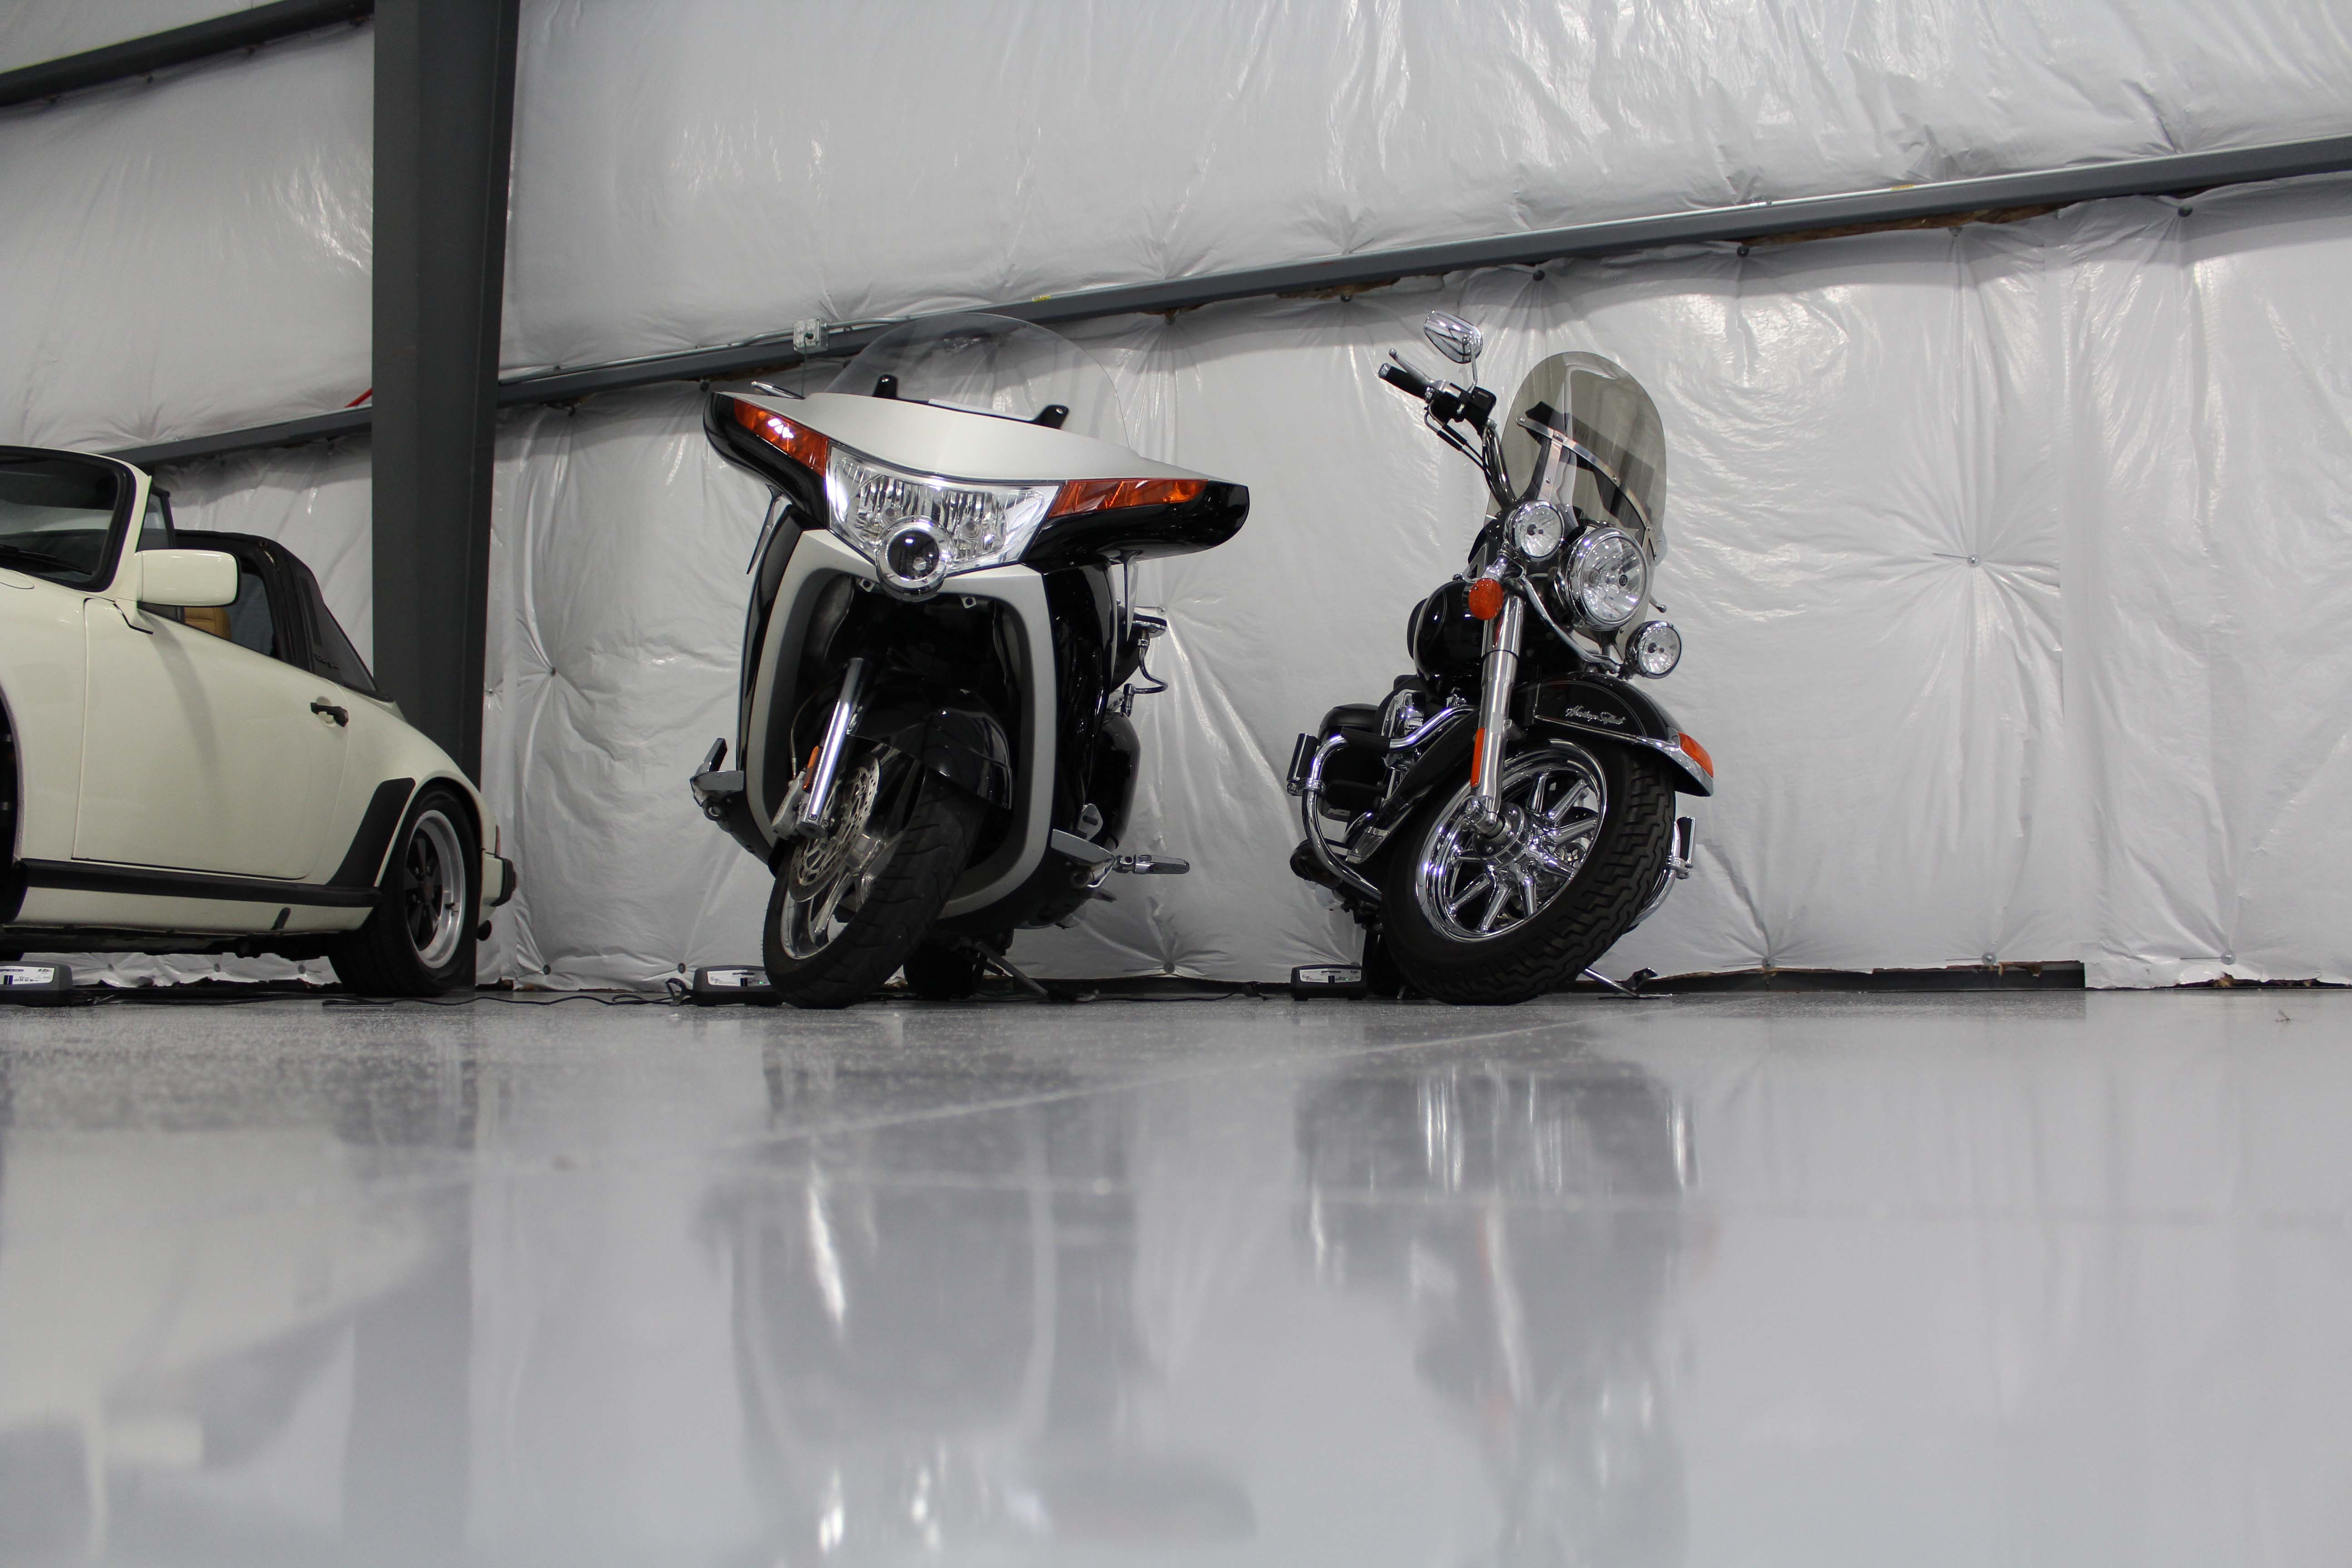 Floor Angle of Motorcycles